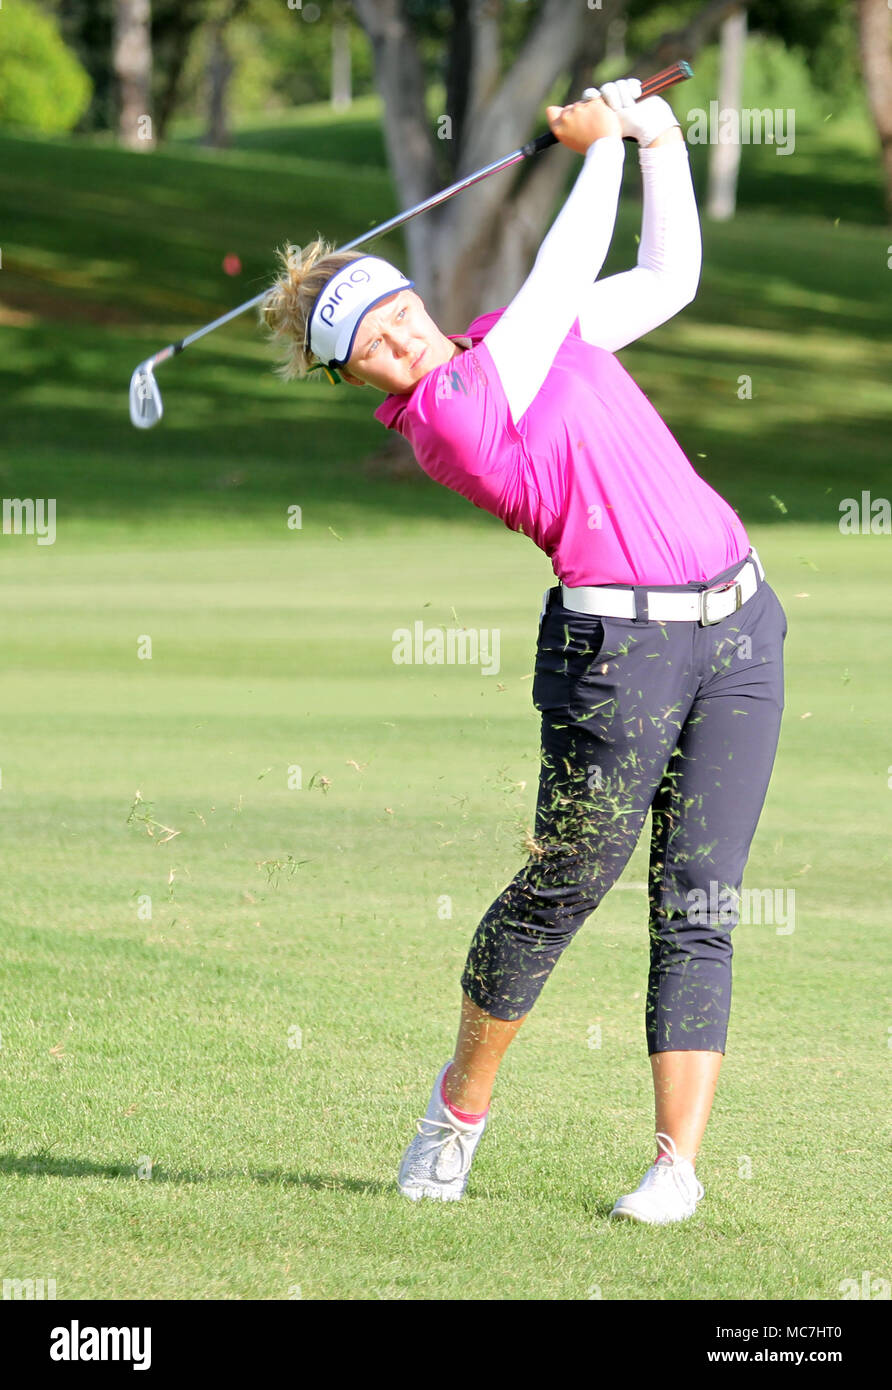 April 13, 2018 - Leader Brooke M. Henderson hits her second on the 18th hole during the third round of the LPGA LOTTE Championship at the Ko Olina Golf Club in Kapolei, HI - Michael Sullivan/CSM Stock Photo